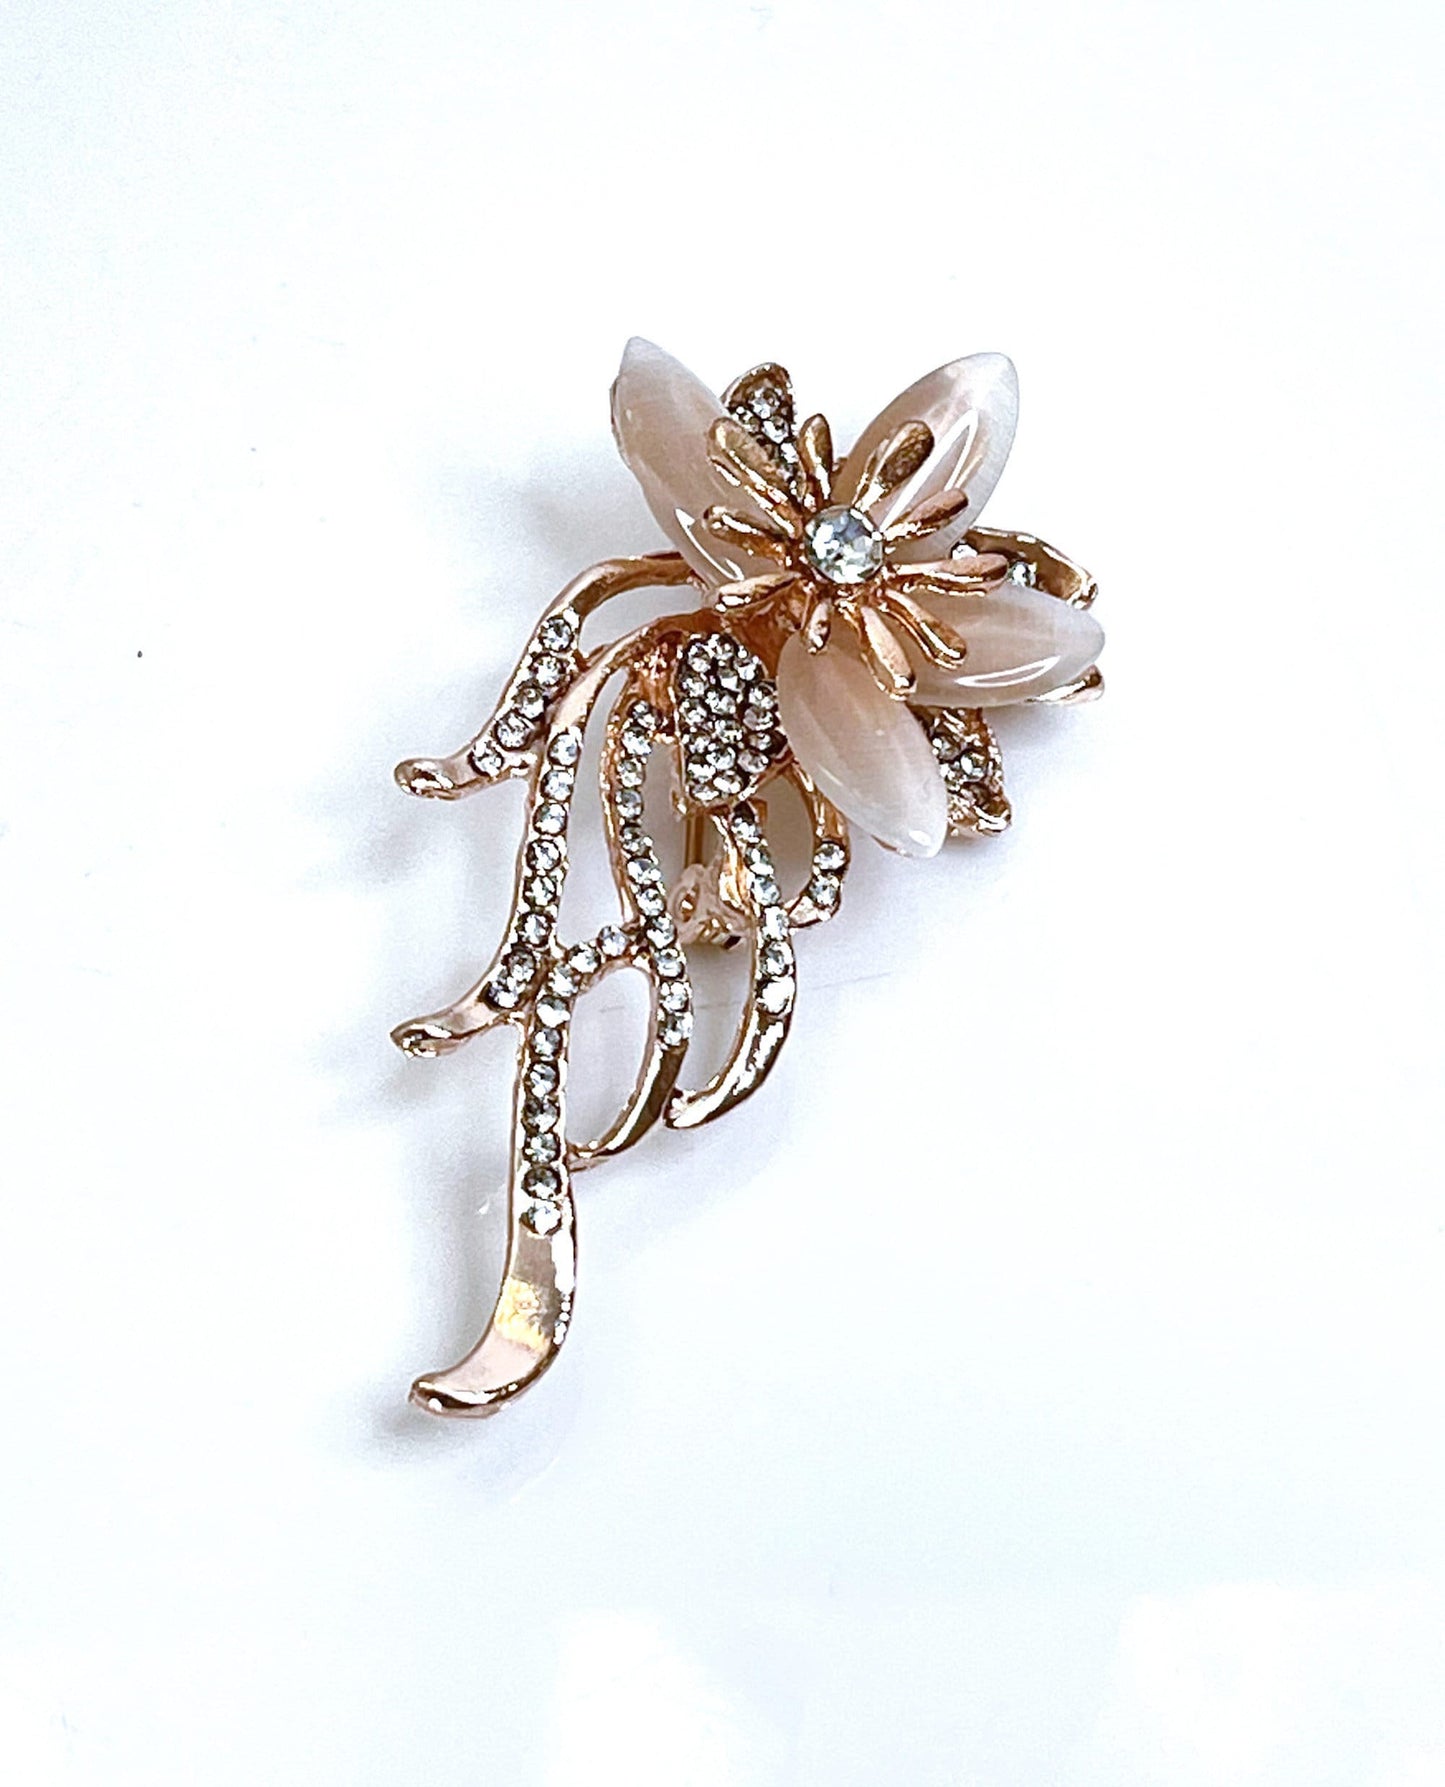 Gold Opal Flower Brooch with Crystals, Fashion Brooch, Elegant Jewellery, Crystal Flower Pin, Brooches for Women,